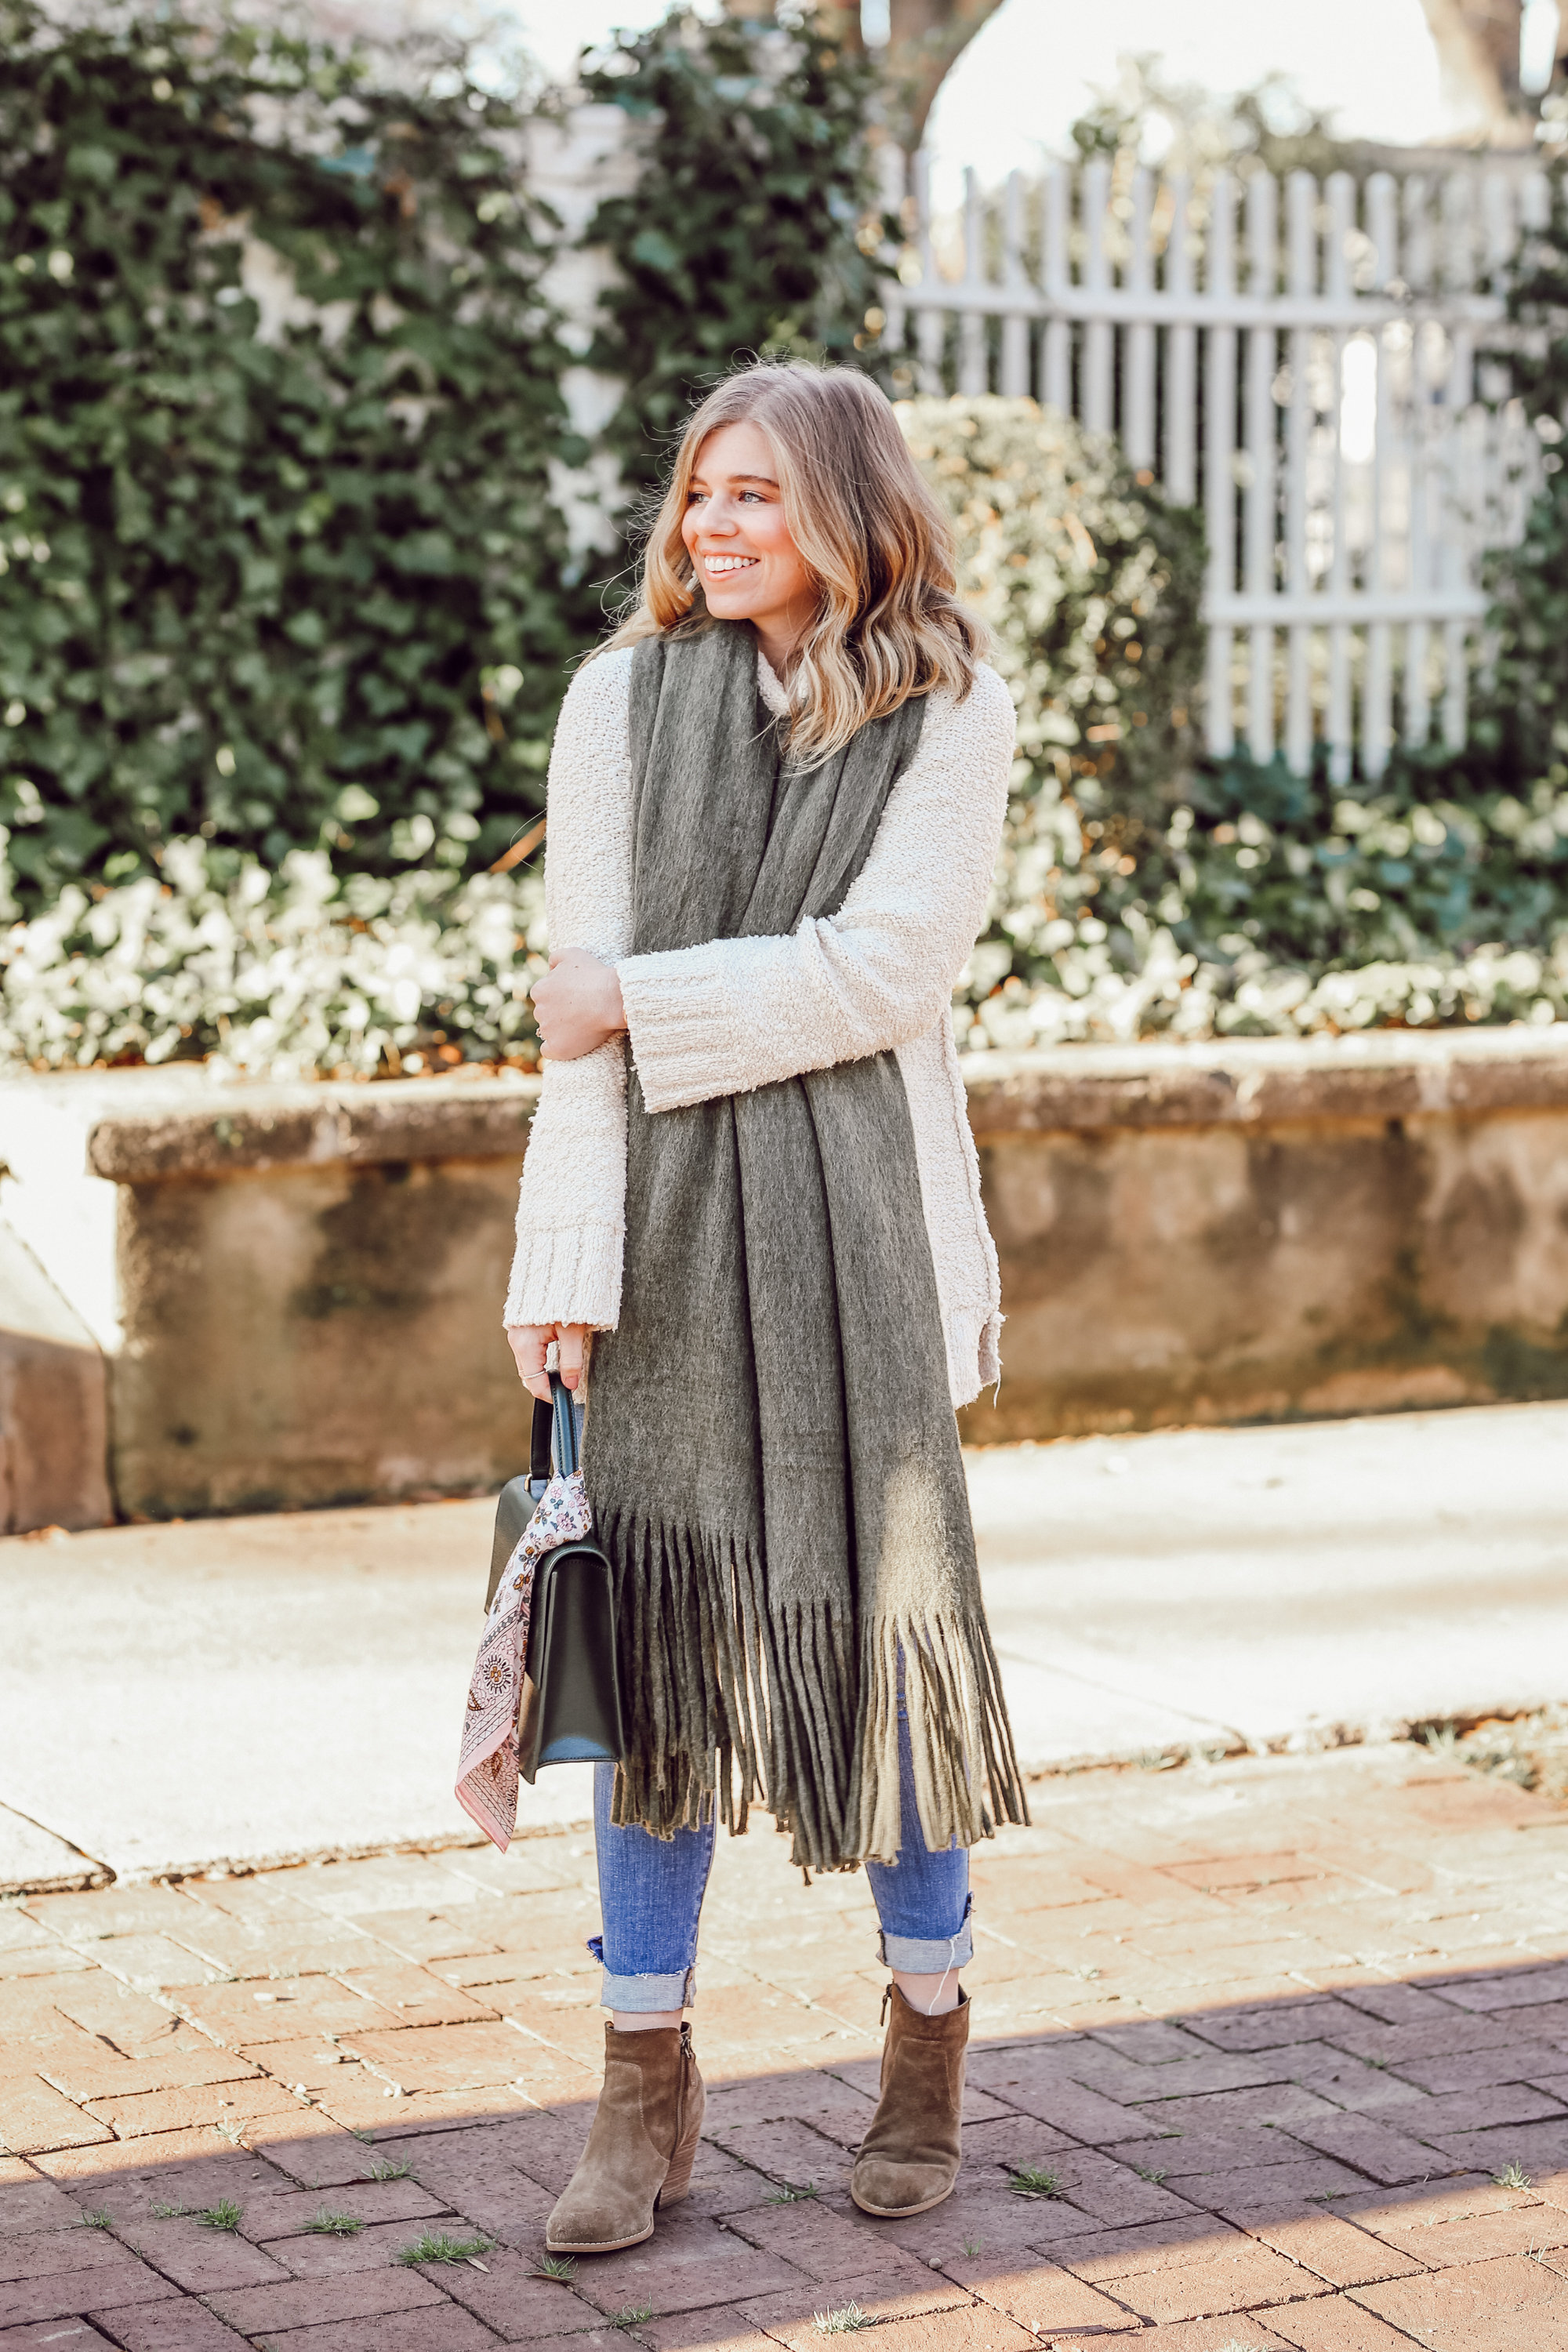 Winter Brewery Hopping Outfit Idea | Casual Everyday Style | Louella Reese